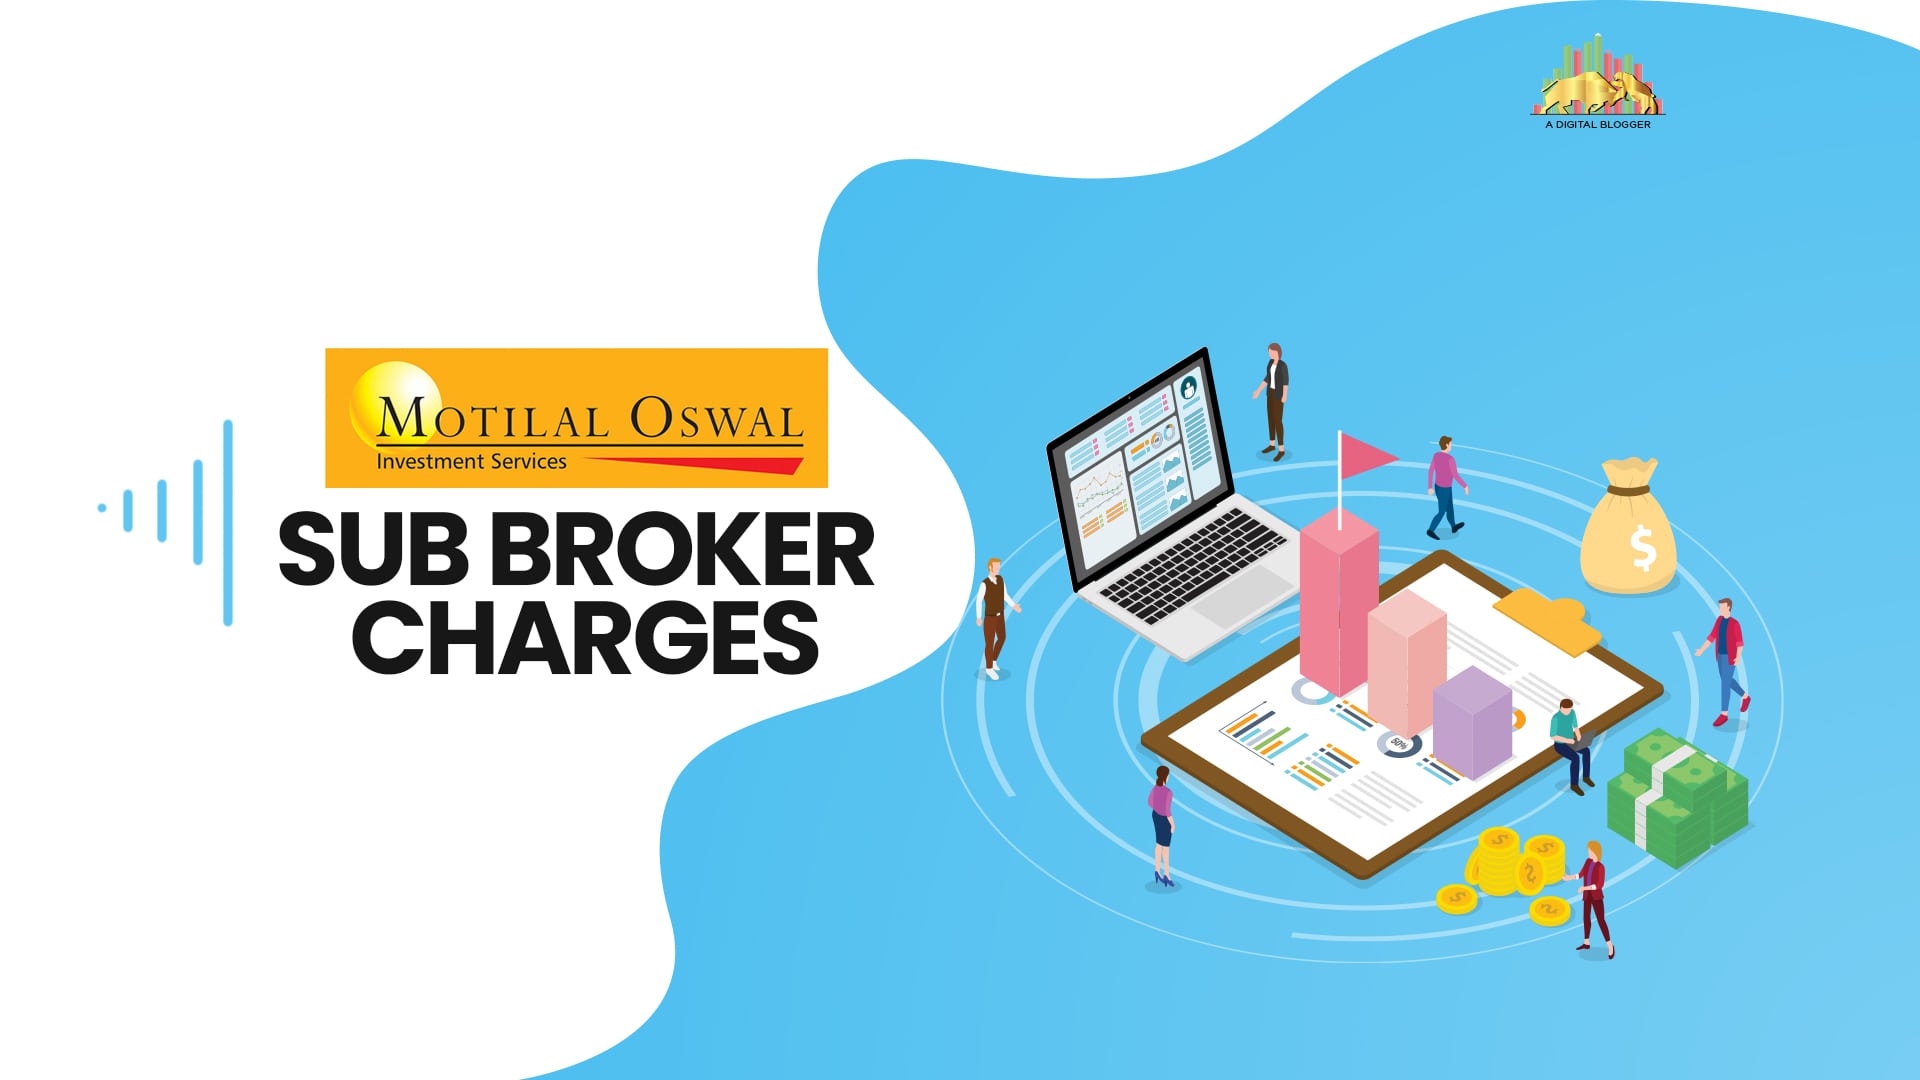 Motilal Oswal Sub Broker Charges list